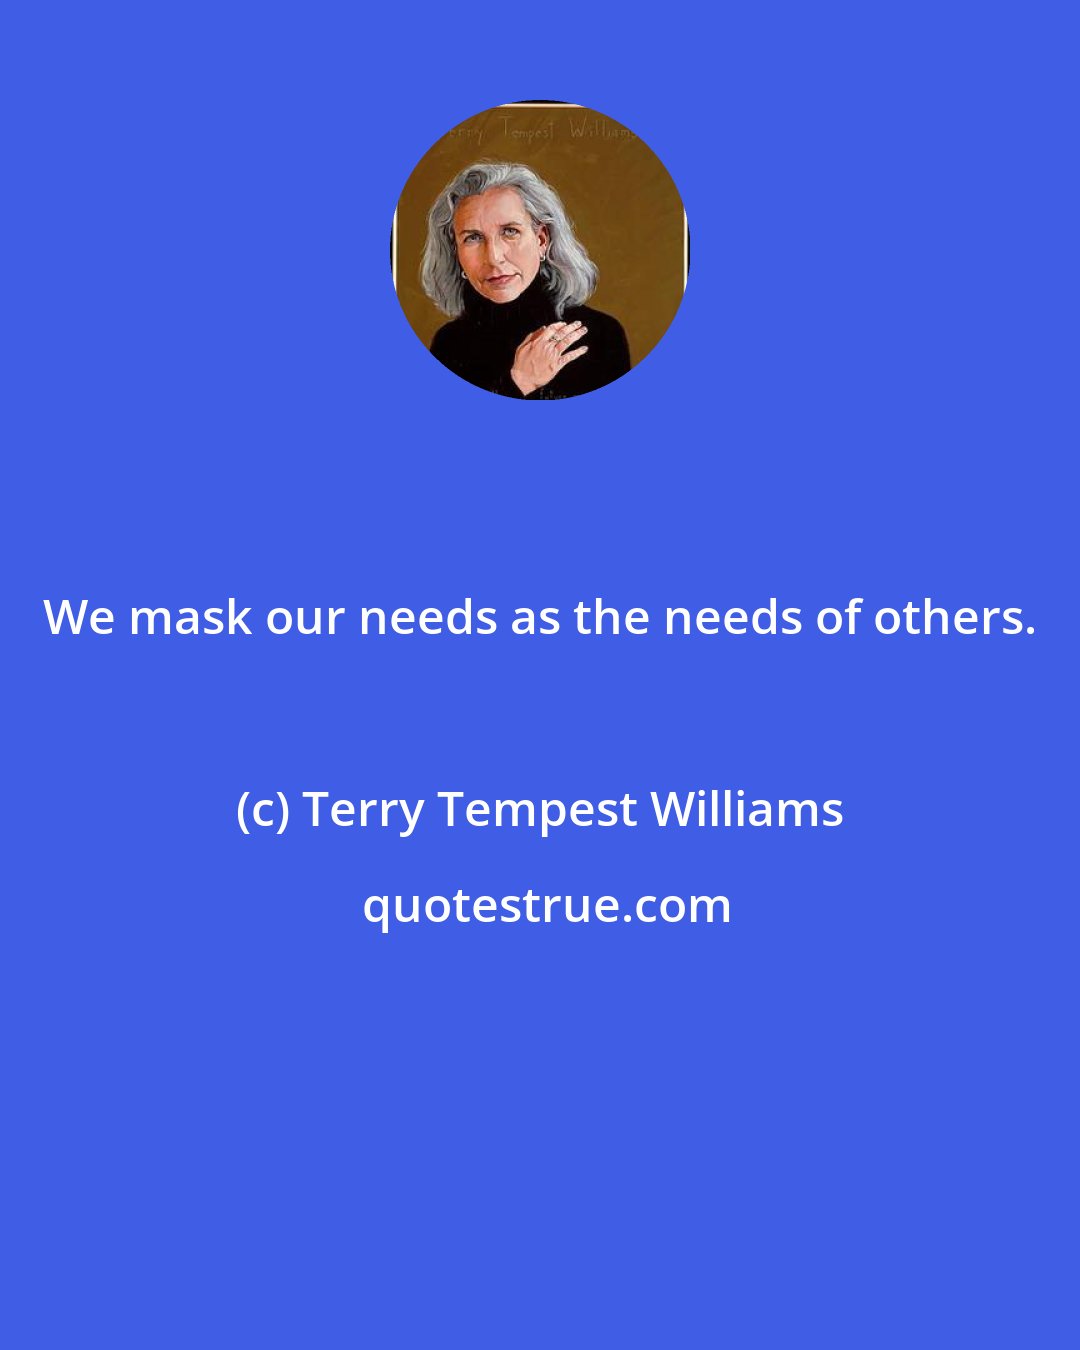 Terry Tempest Williams: We mask our needs as the needs of others.